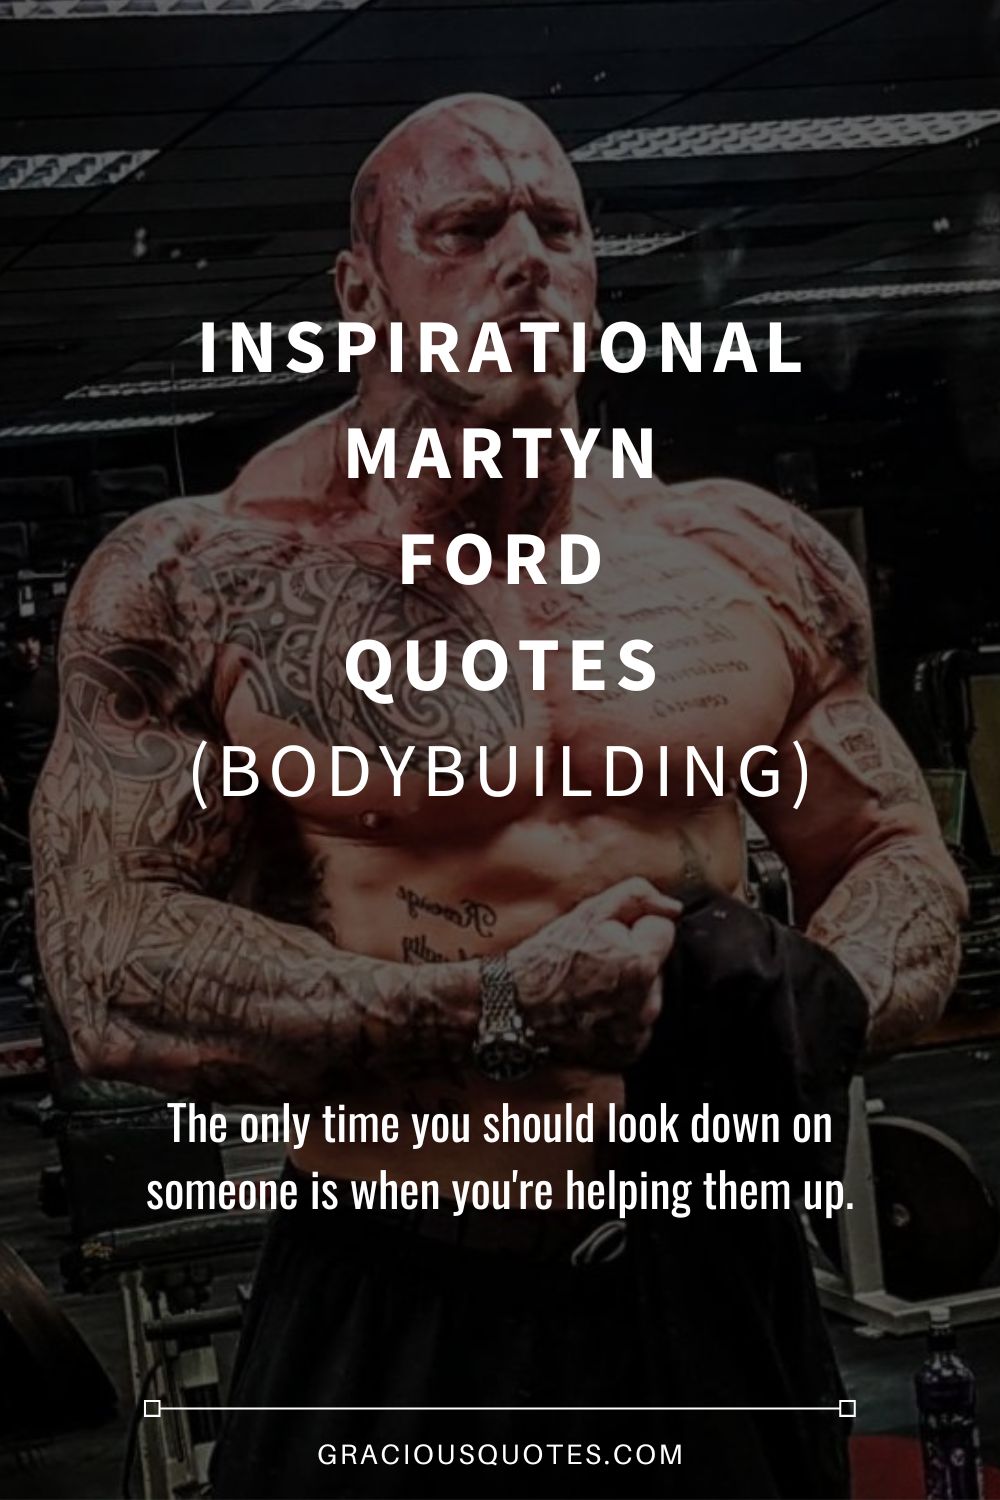 Inspirational Martyn Ford Quotes (BODYBUILDING) - Gracious Quotes